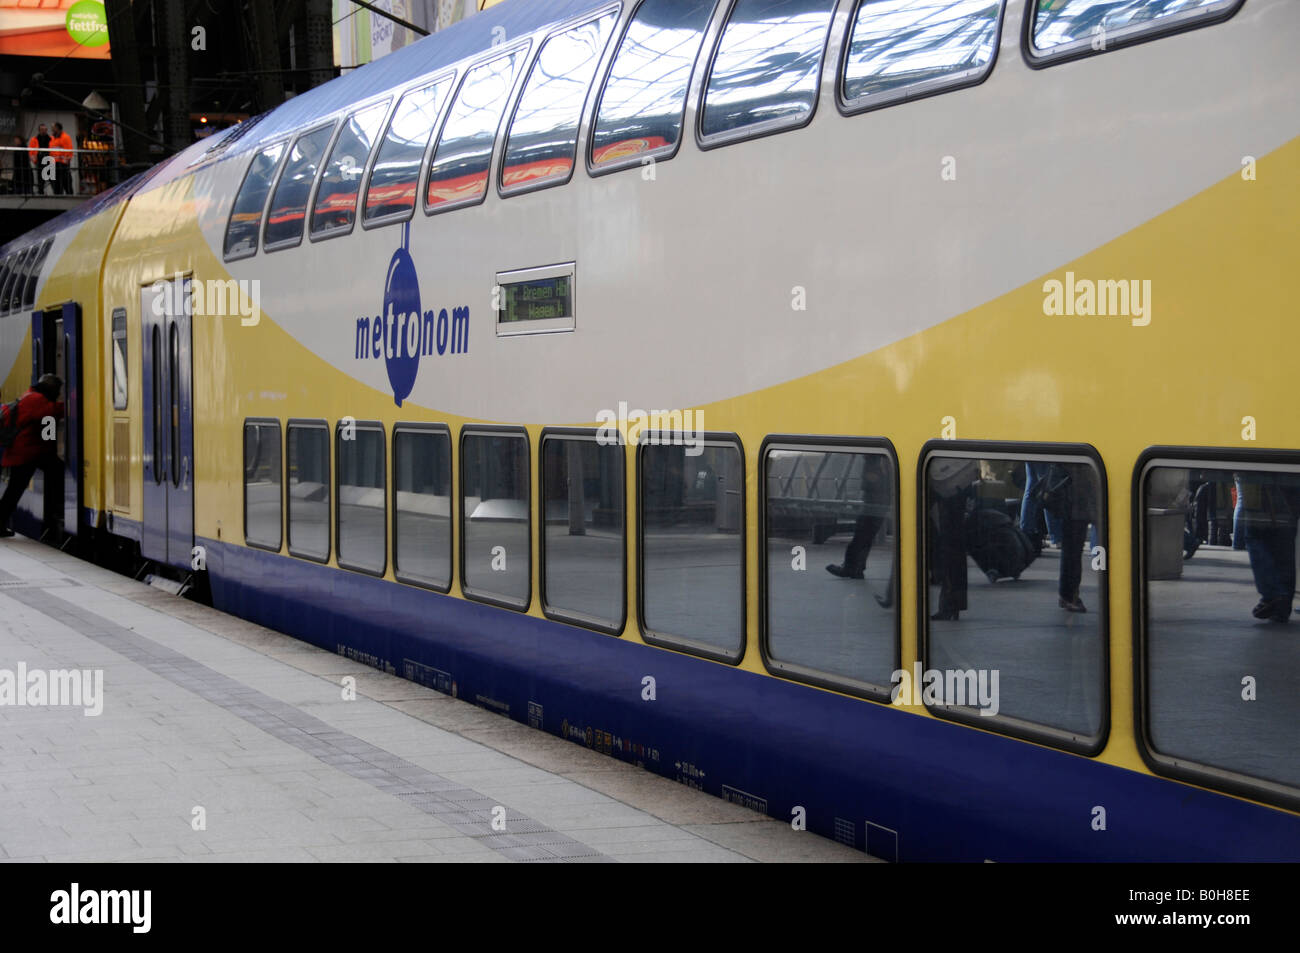 Double-decker passenger train carriage, train going to Uelzen, Hamburg central station, Germany Stock Photo